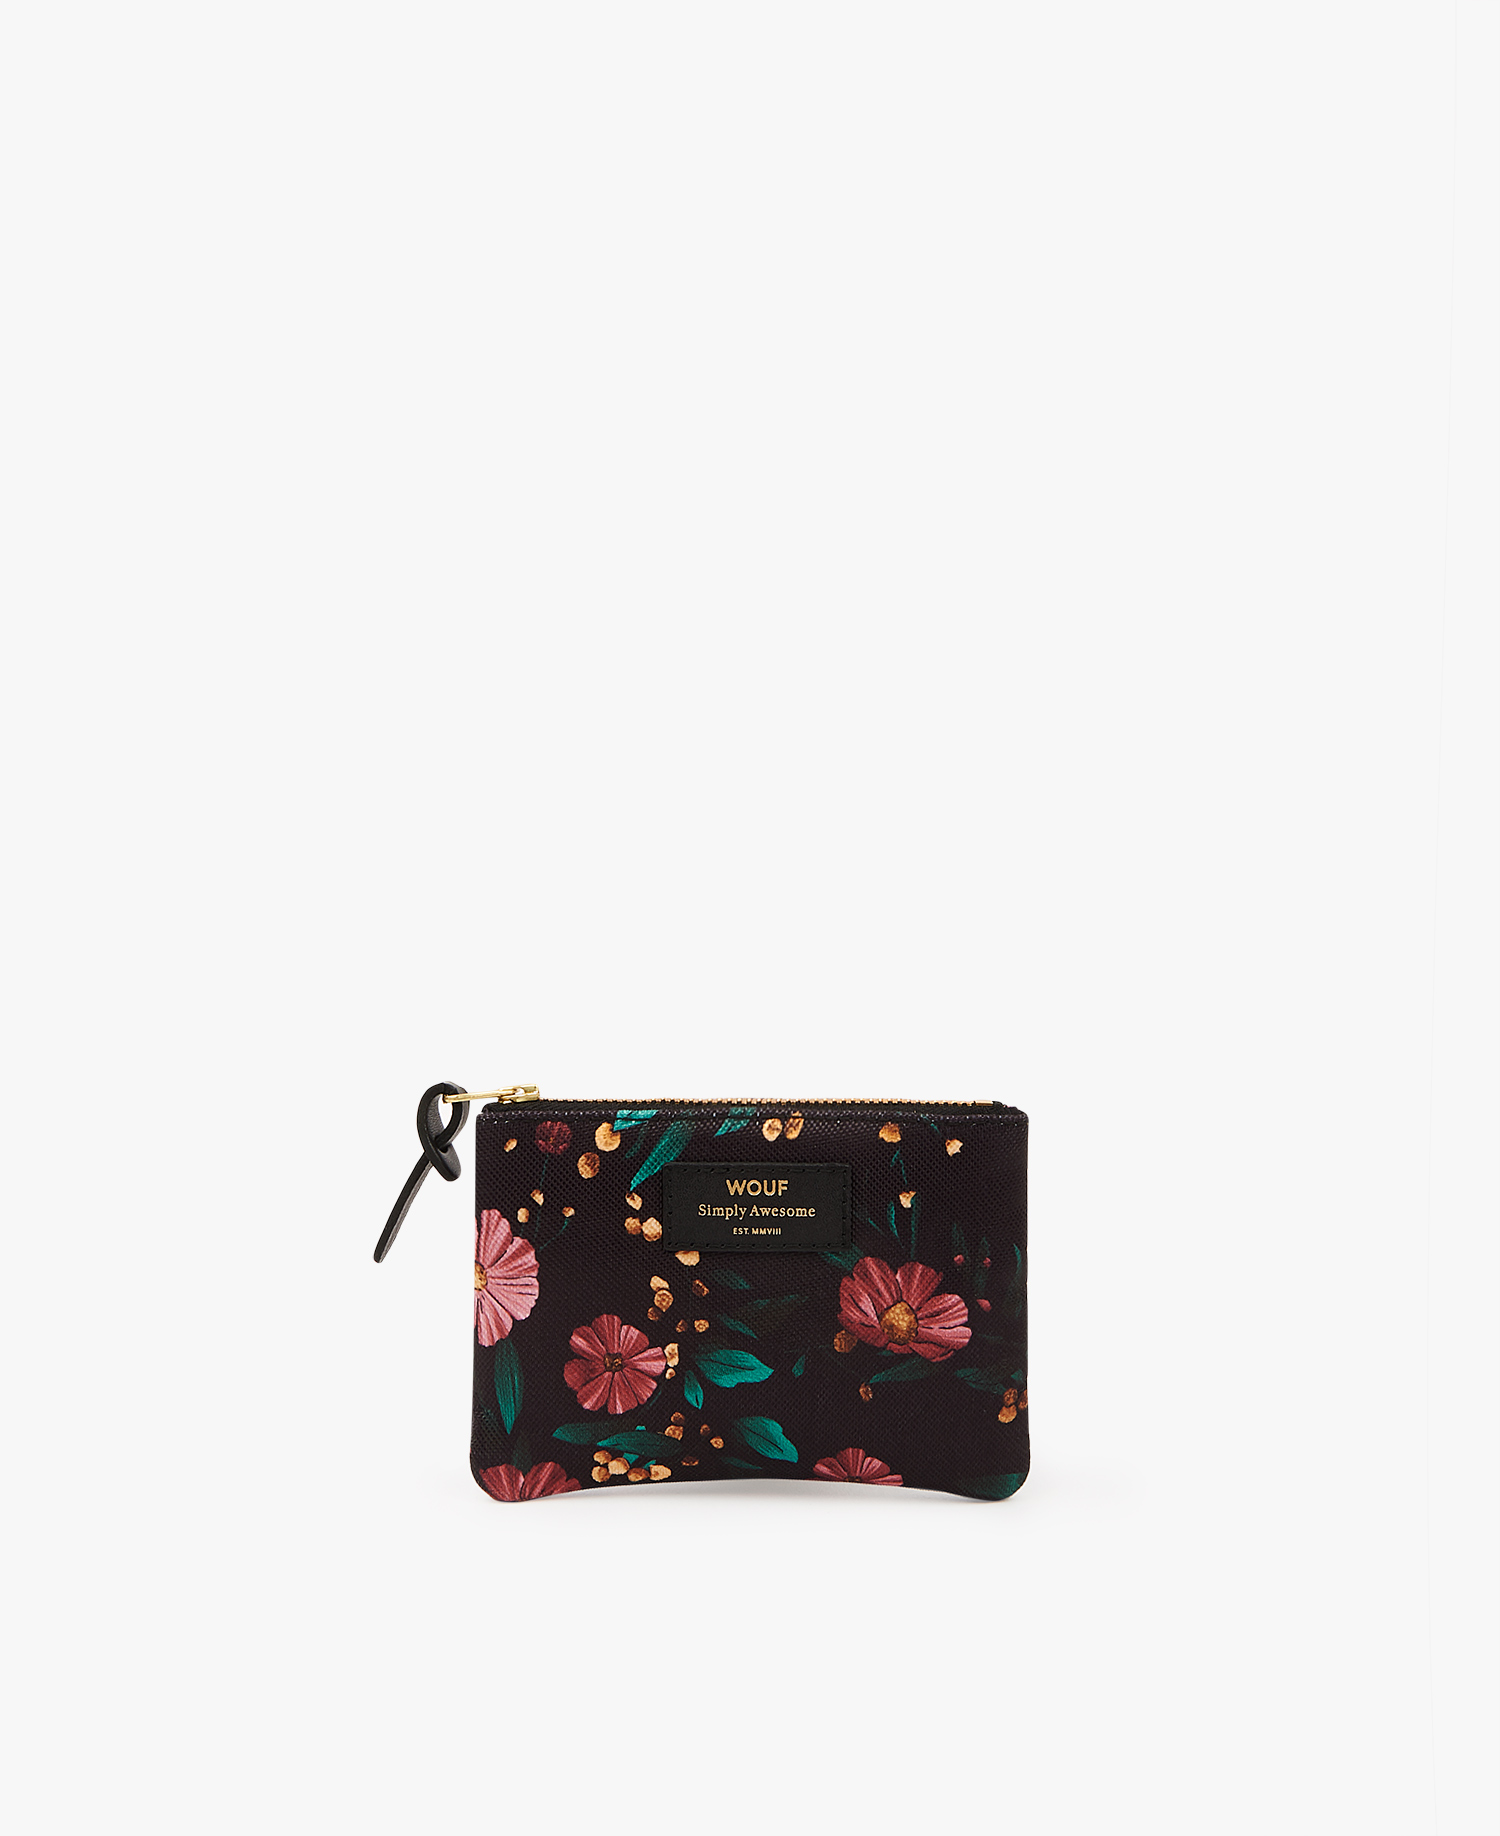 Black-Flowers-Small-Pouch-Bag-Front